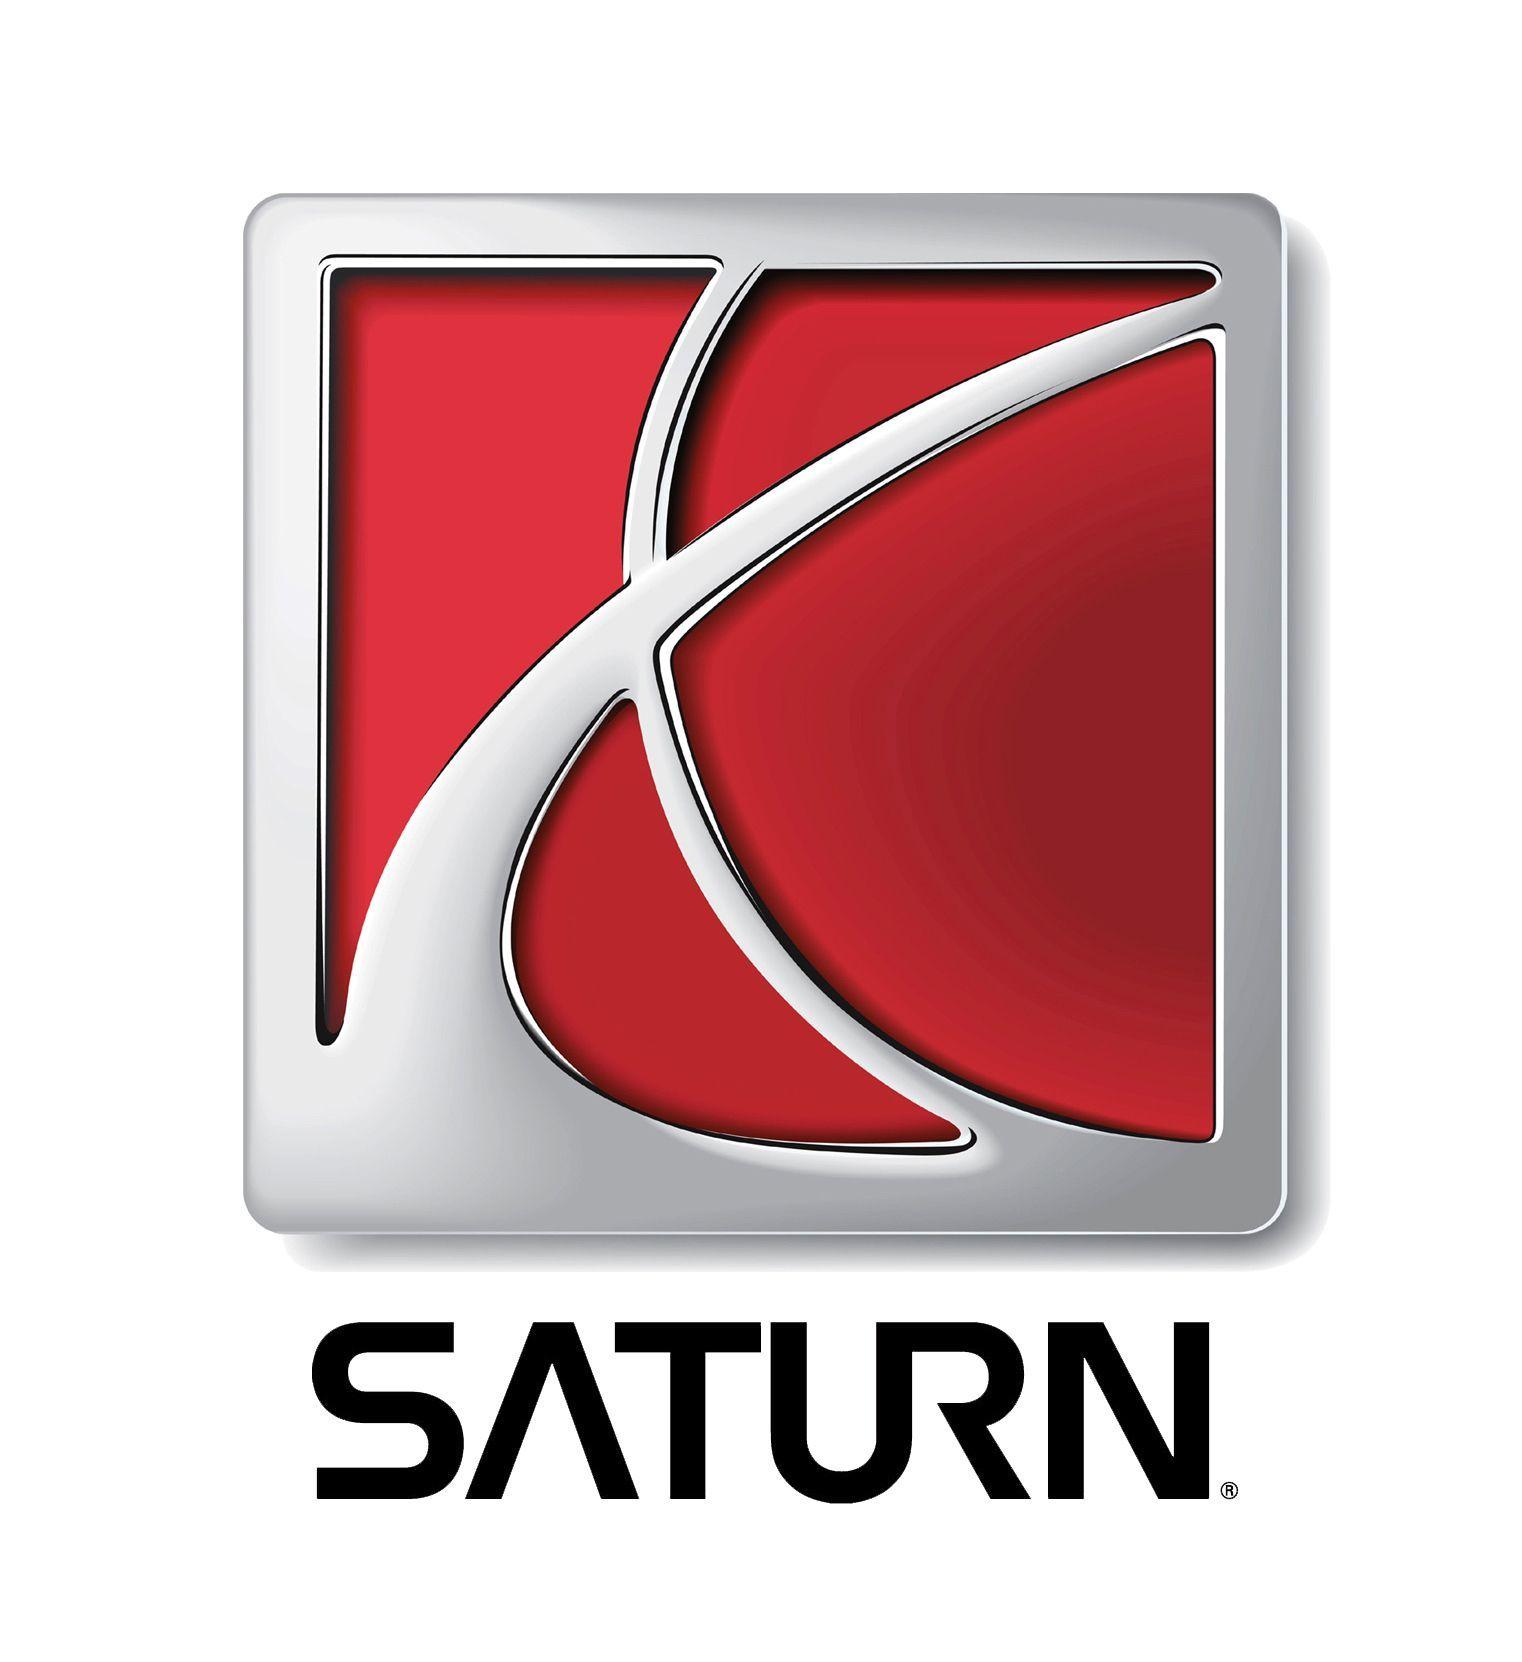 Cool Car Company Logo - Saturn the car company alludes to the Roman name for Kronos the ...